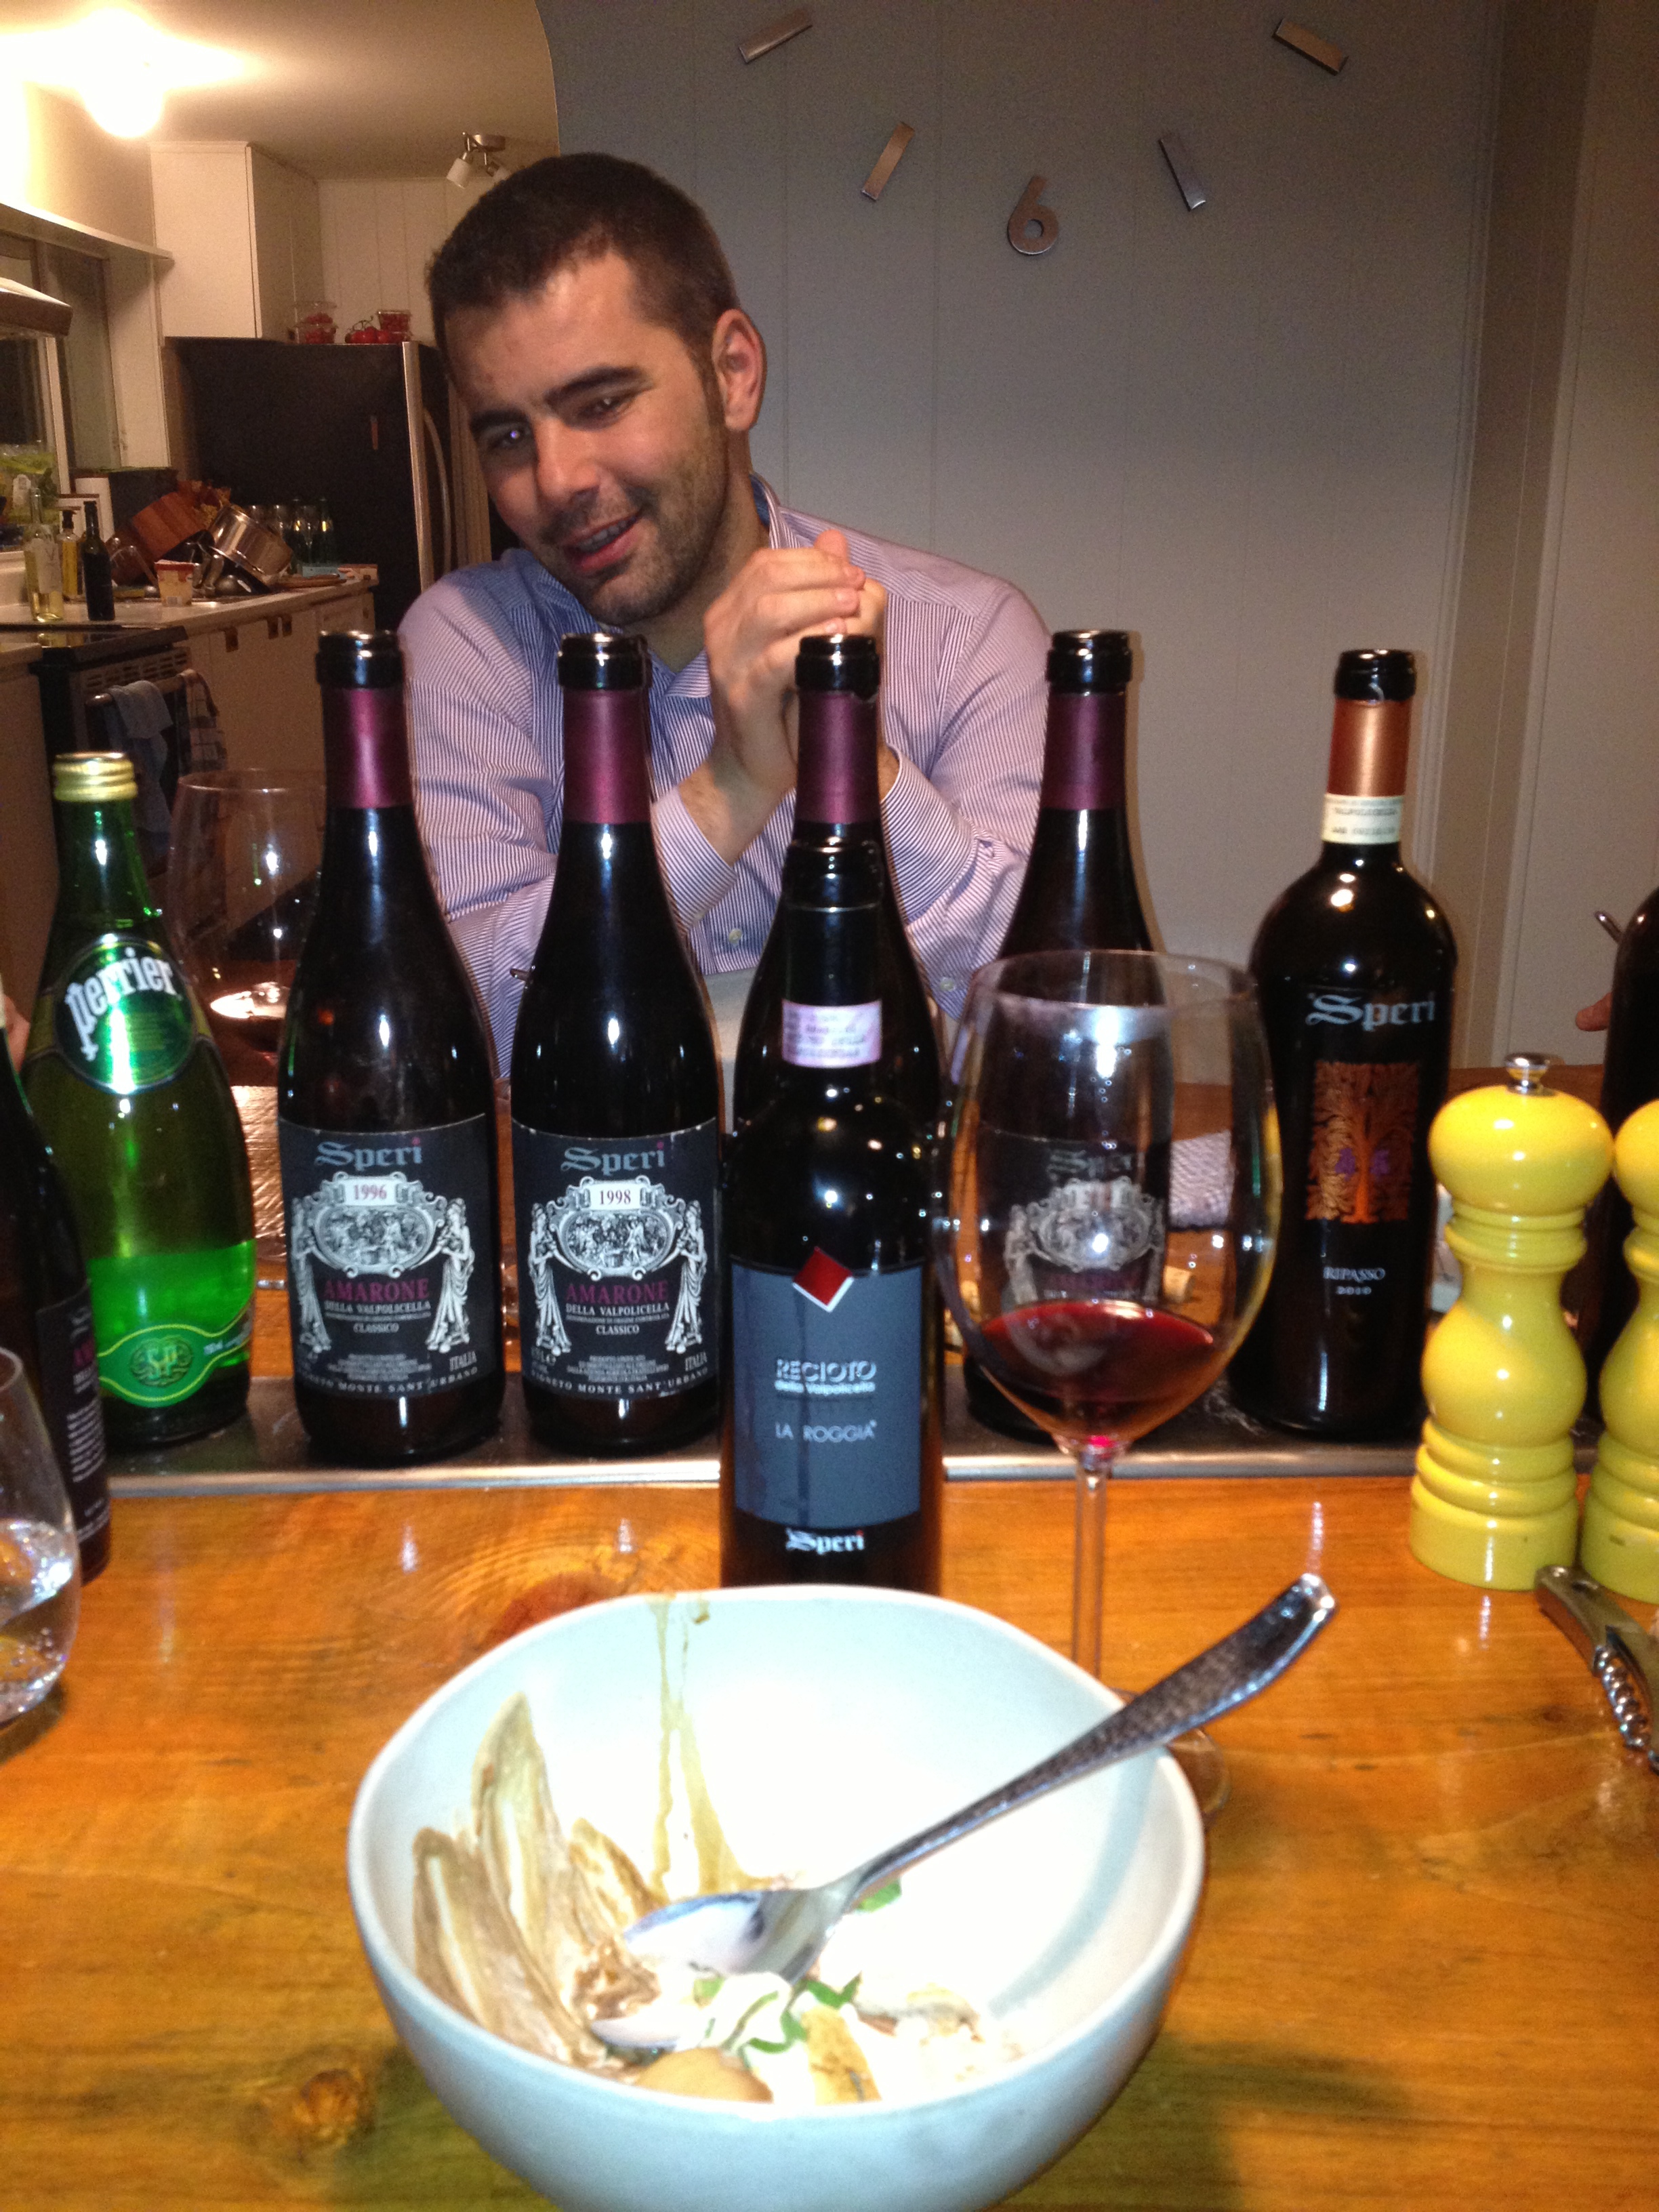  2009 Speri Recioto and ice cream drizzled with aged fig balsamic and mint leaf.​ 